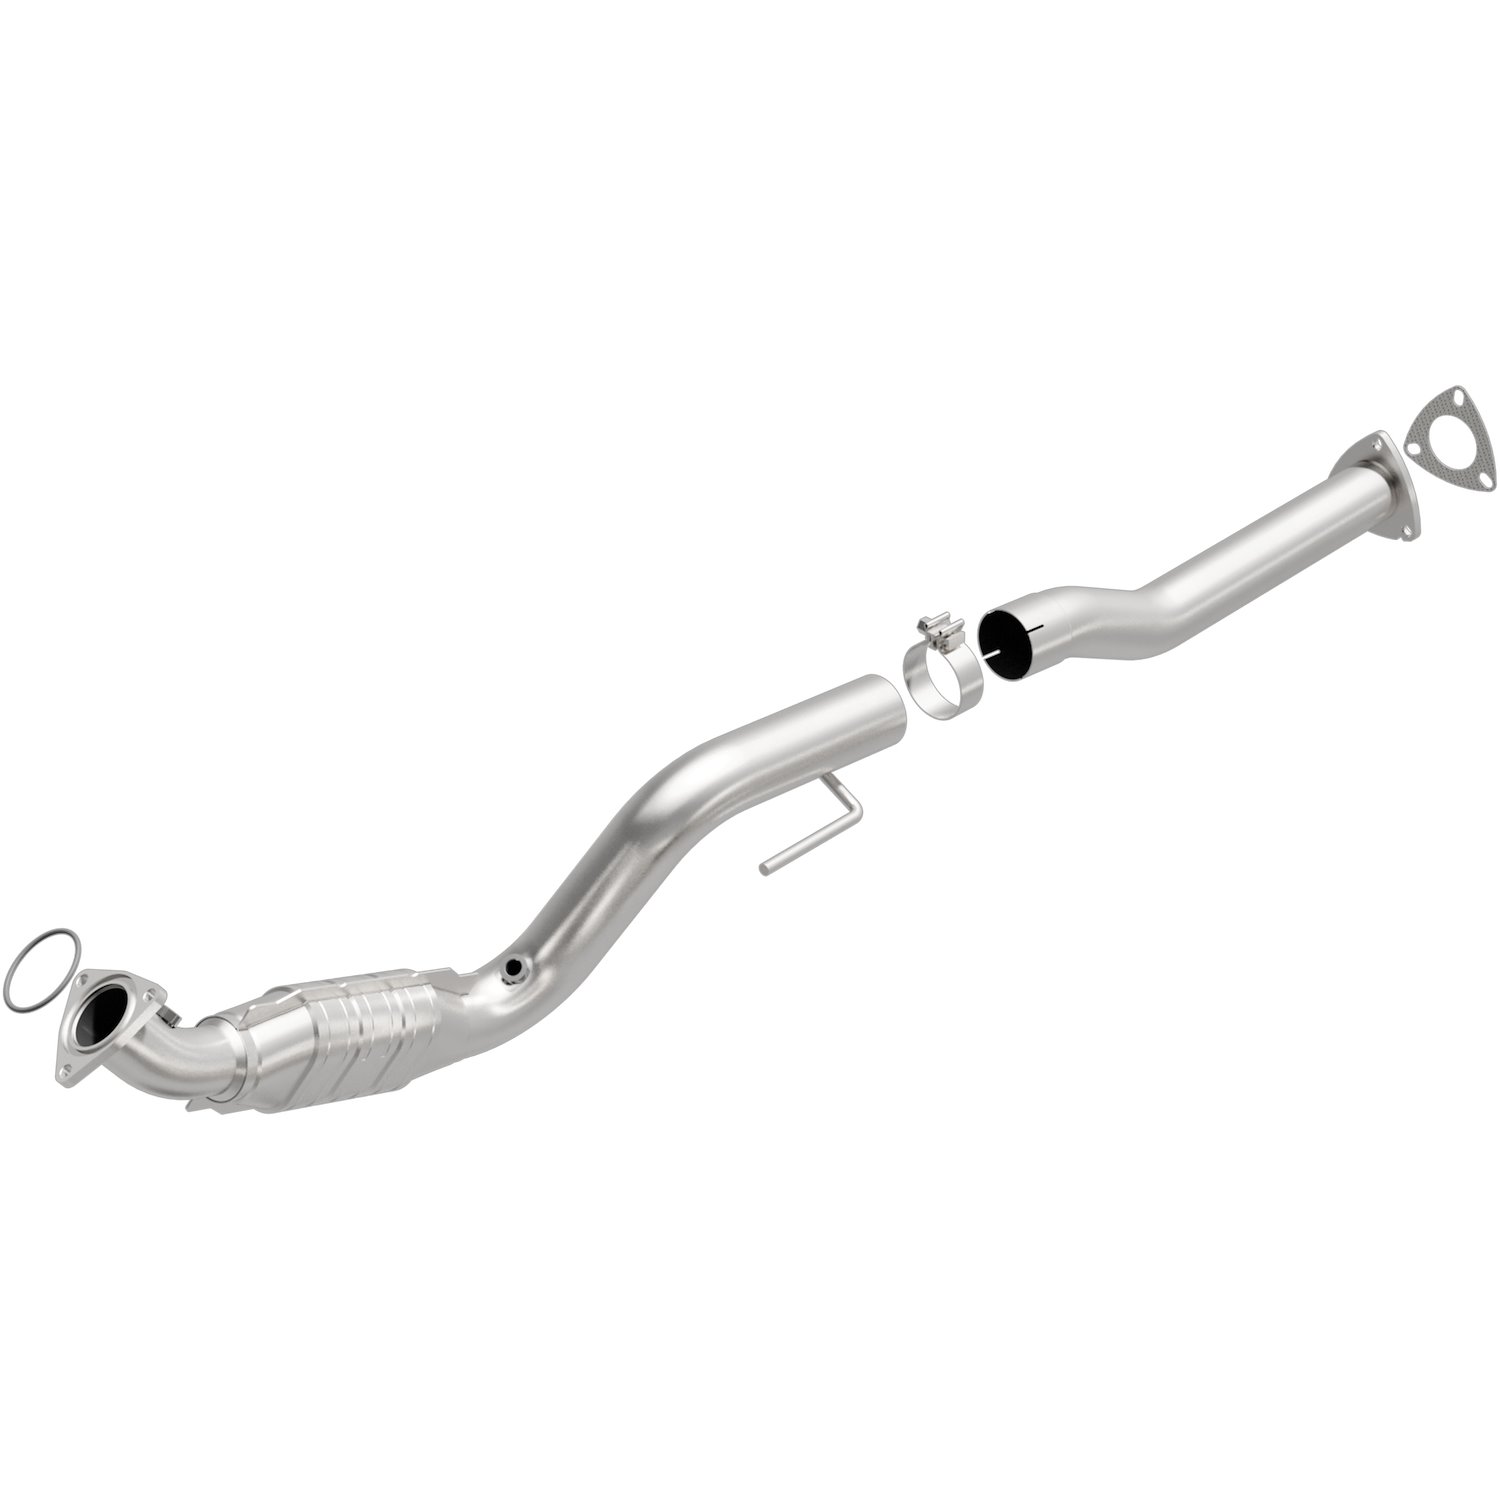 OEM Grade Federal / EPA Compliant Direct-Fit Catalytic Converter 51535